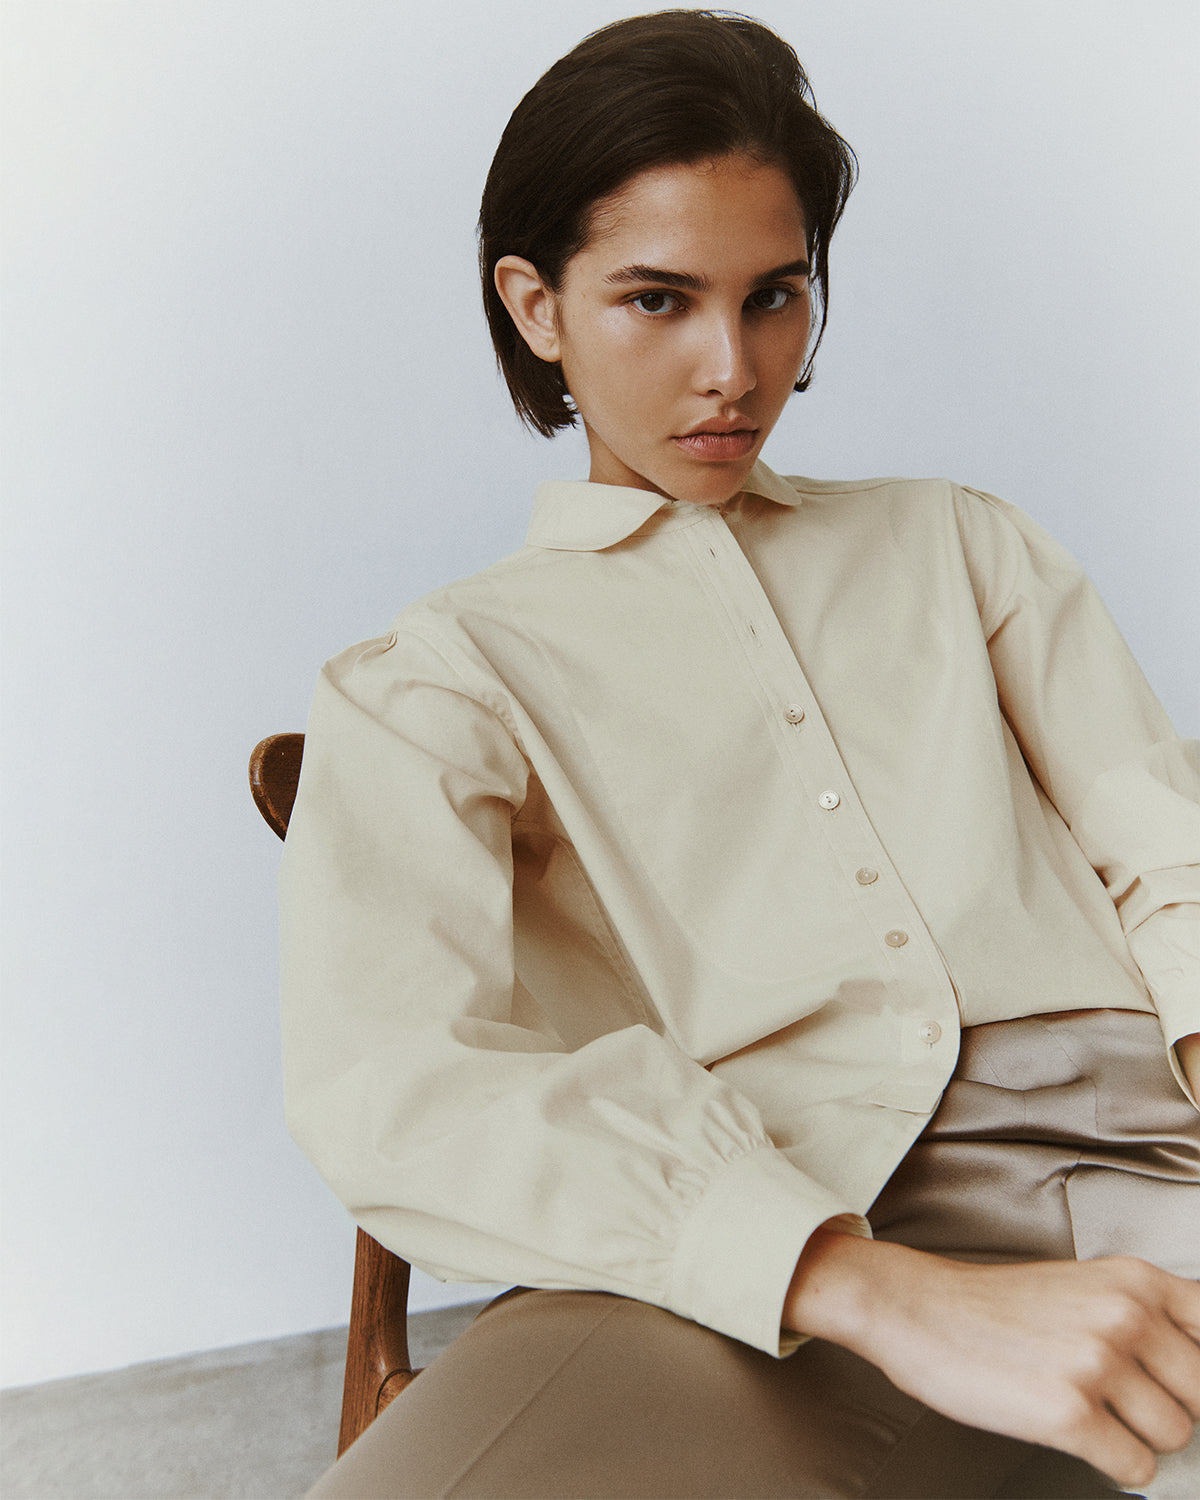 A brunette woman slouches in a wooden chair wearing trousers and a buttery cream button-down in a classic menswear silhouette